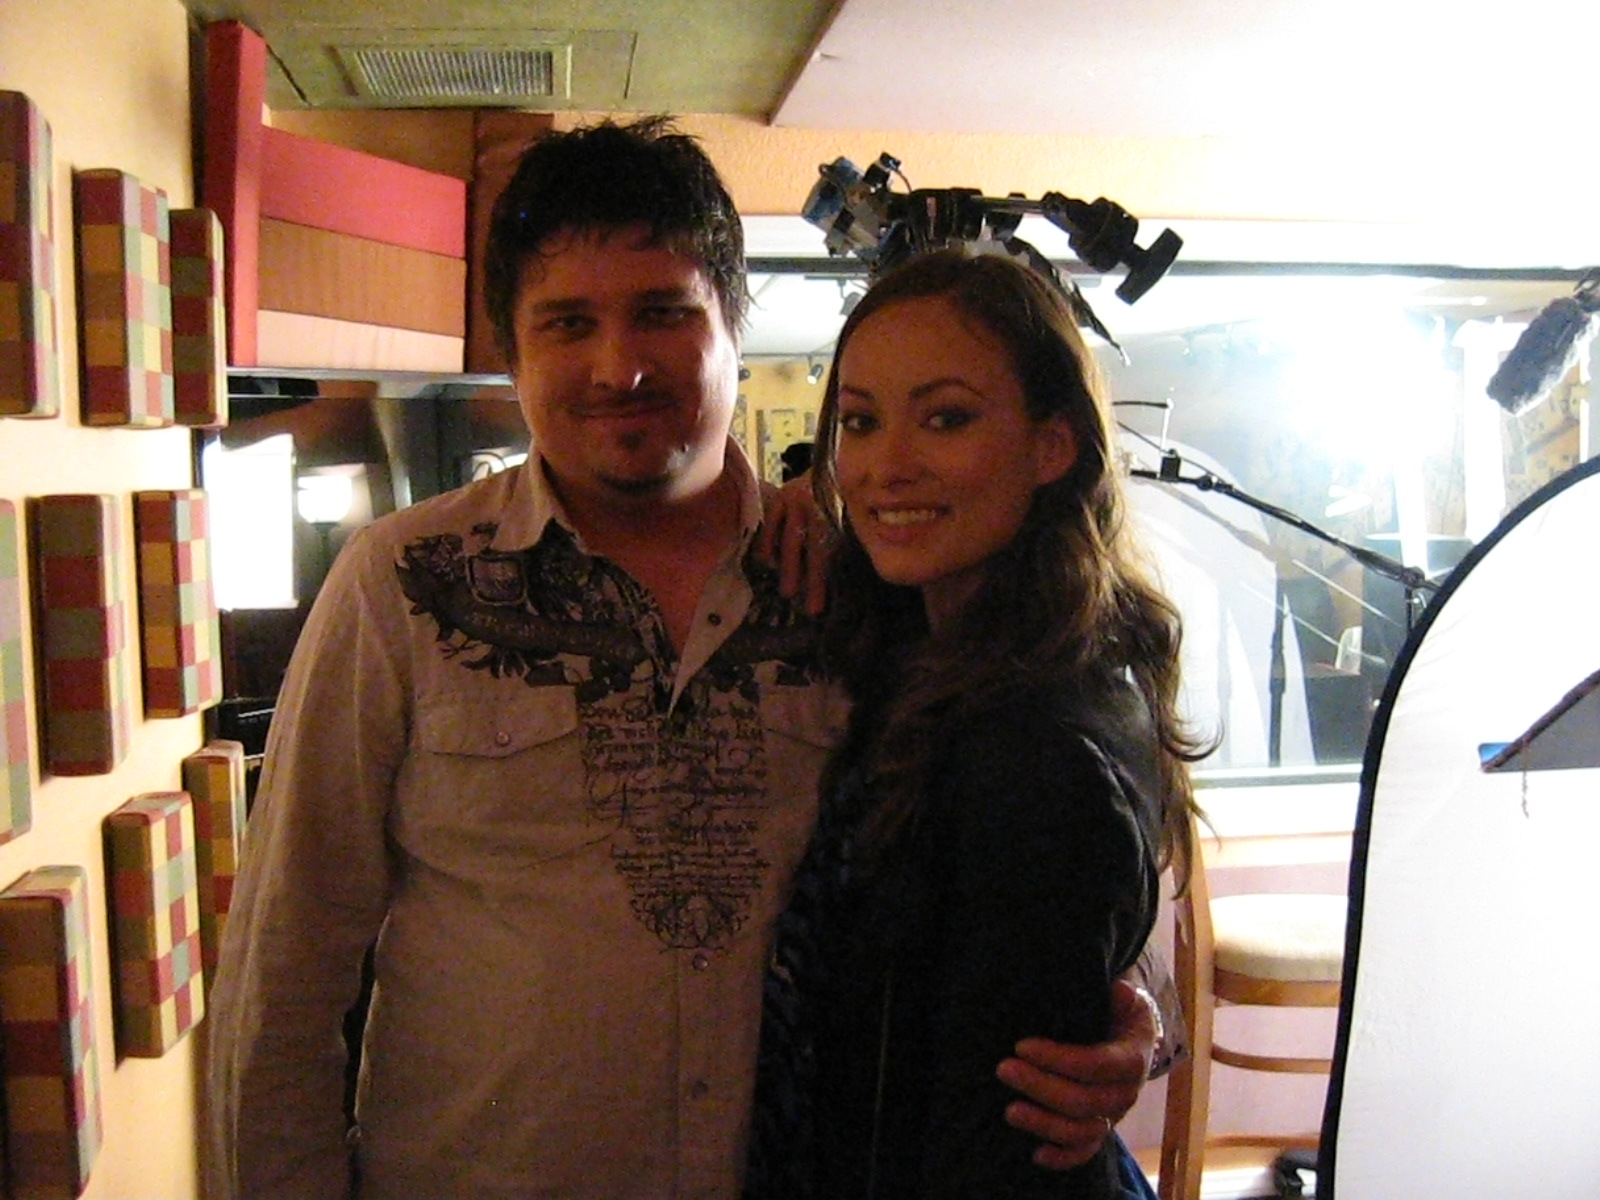 director Chris Borders (left), and actress Olivia Wilde (right) on the set of 